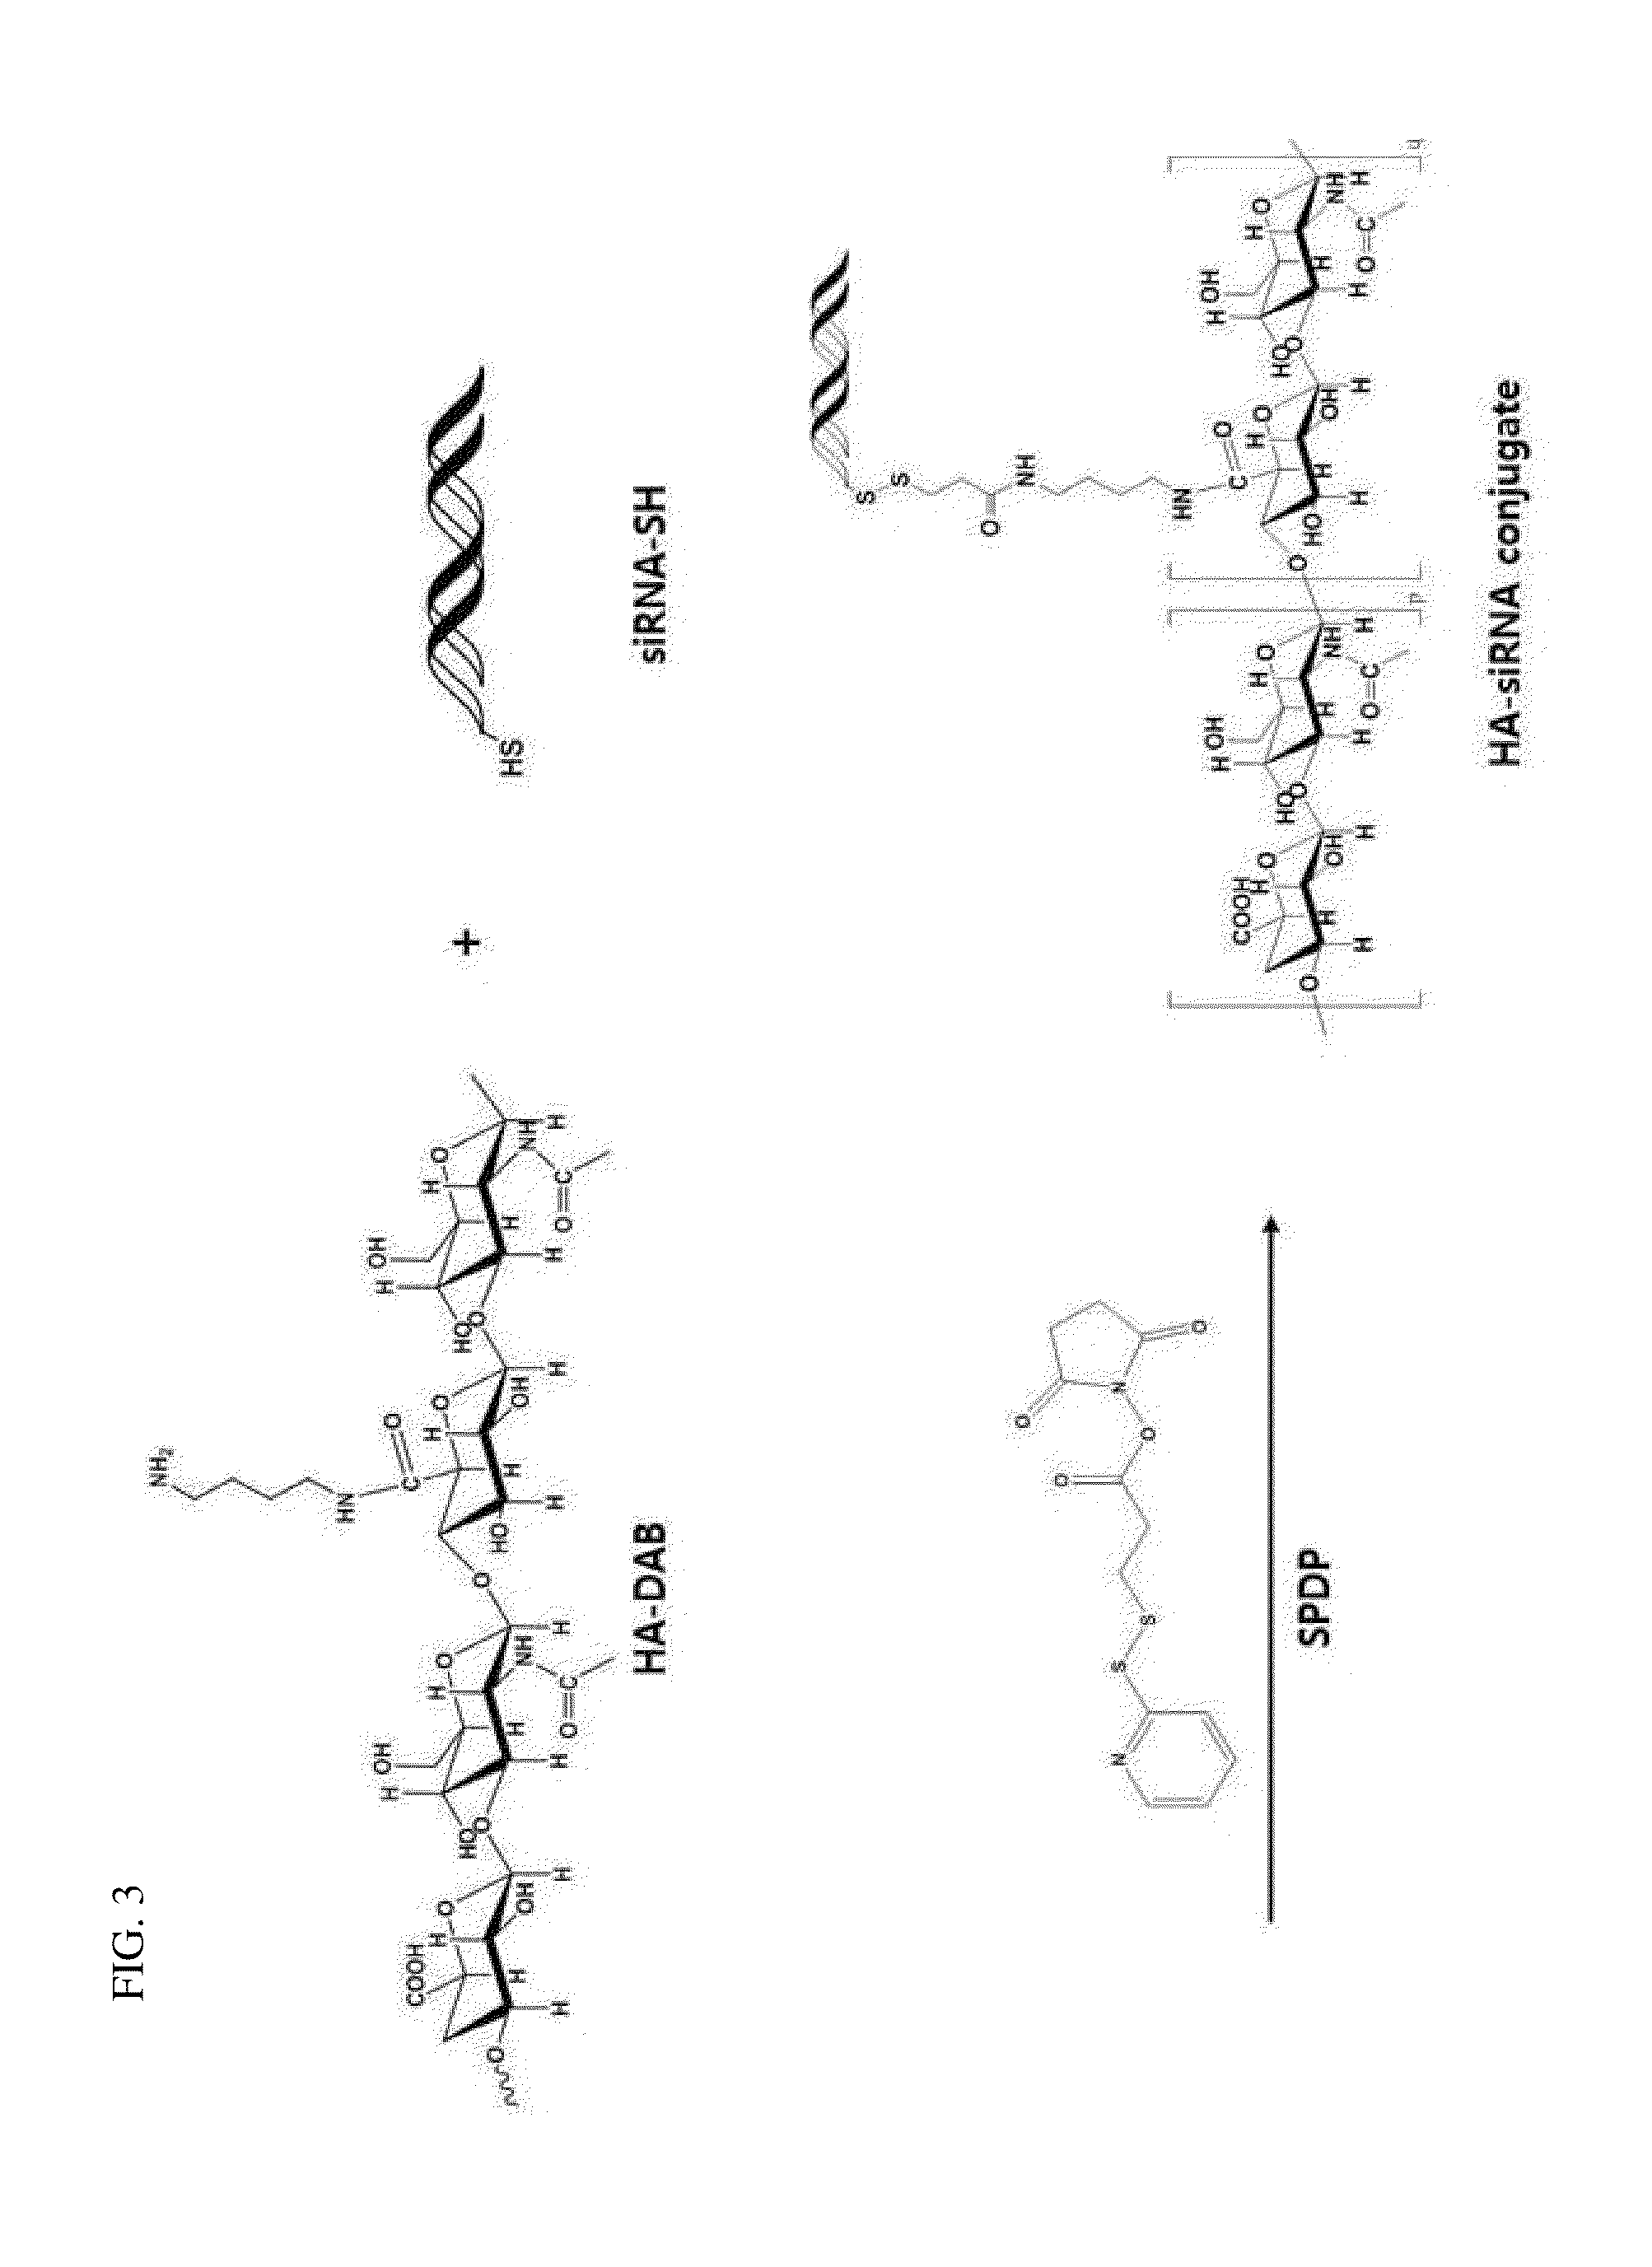 Hyaluronic acid-nucleic acid conjugate and composition for nucleic acid delivery containing the same